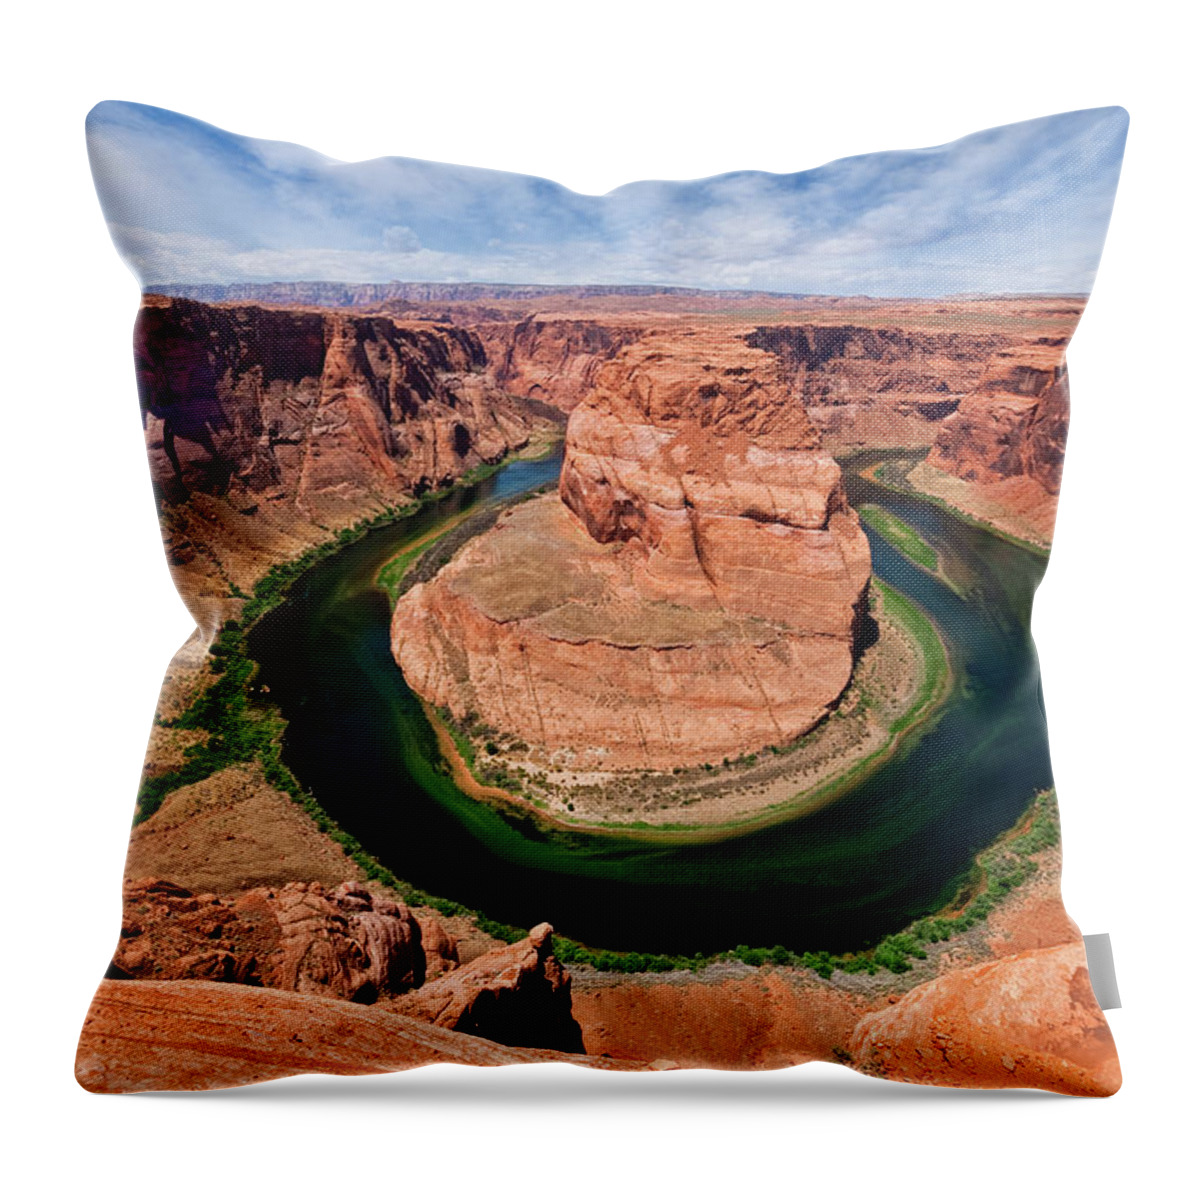 Arid Climate Throw Pillow featuring the photograph Horseshoe Bend on the Colorado River by Jeff Goulden